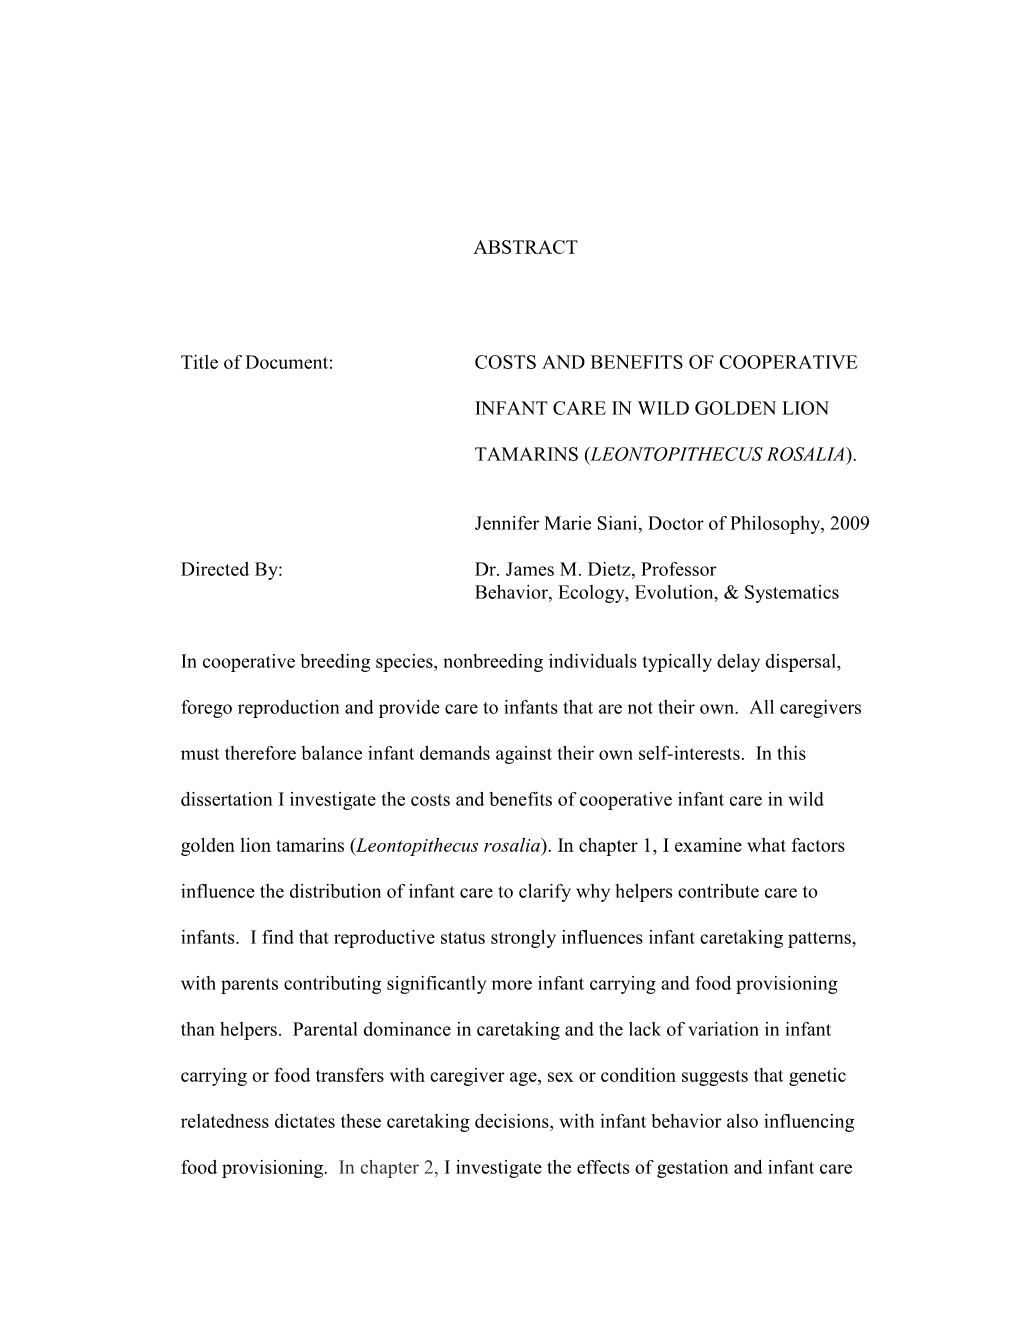 ABSTRACT Title of Document: COSTS and BENEFITS of COOPERATIVE INFANT CARE in WILD GOLDEN LION TAMARINS (LEONTOPITHECUS ROSALIA)